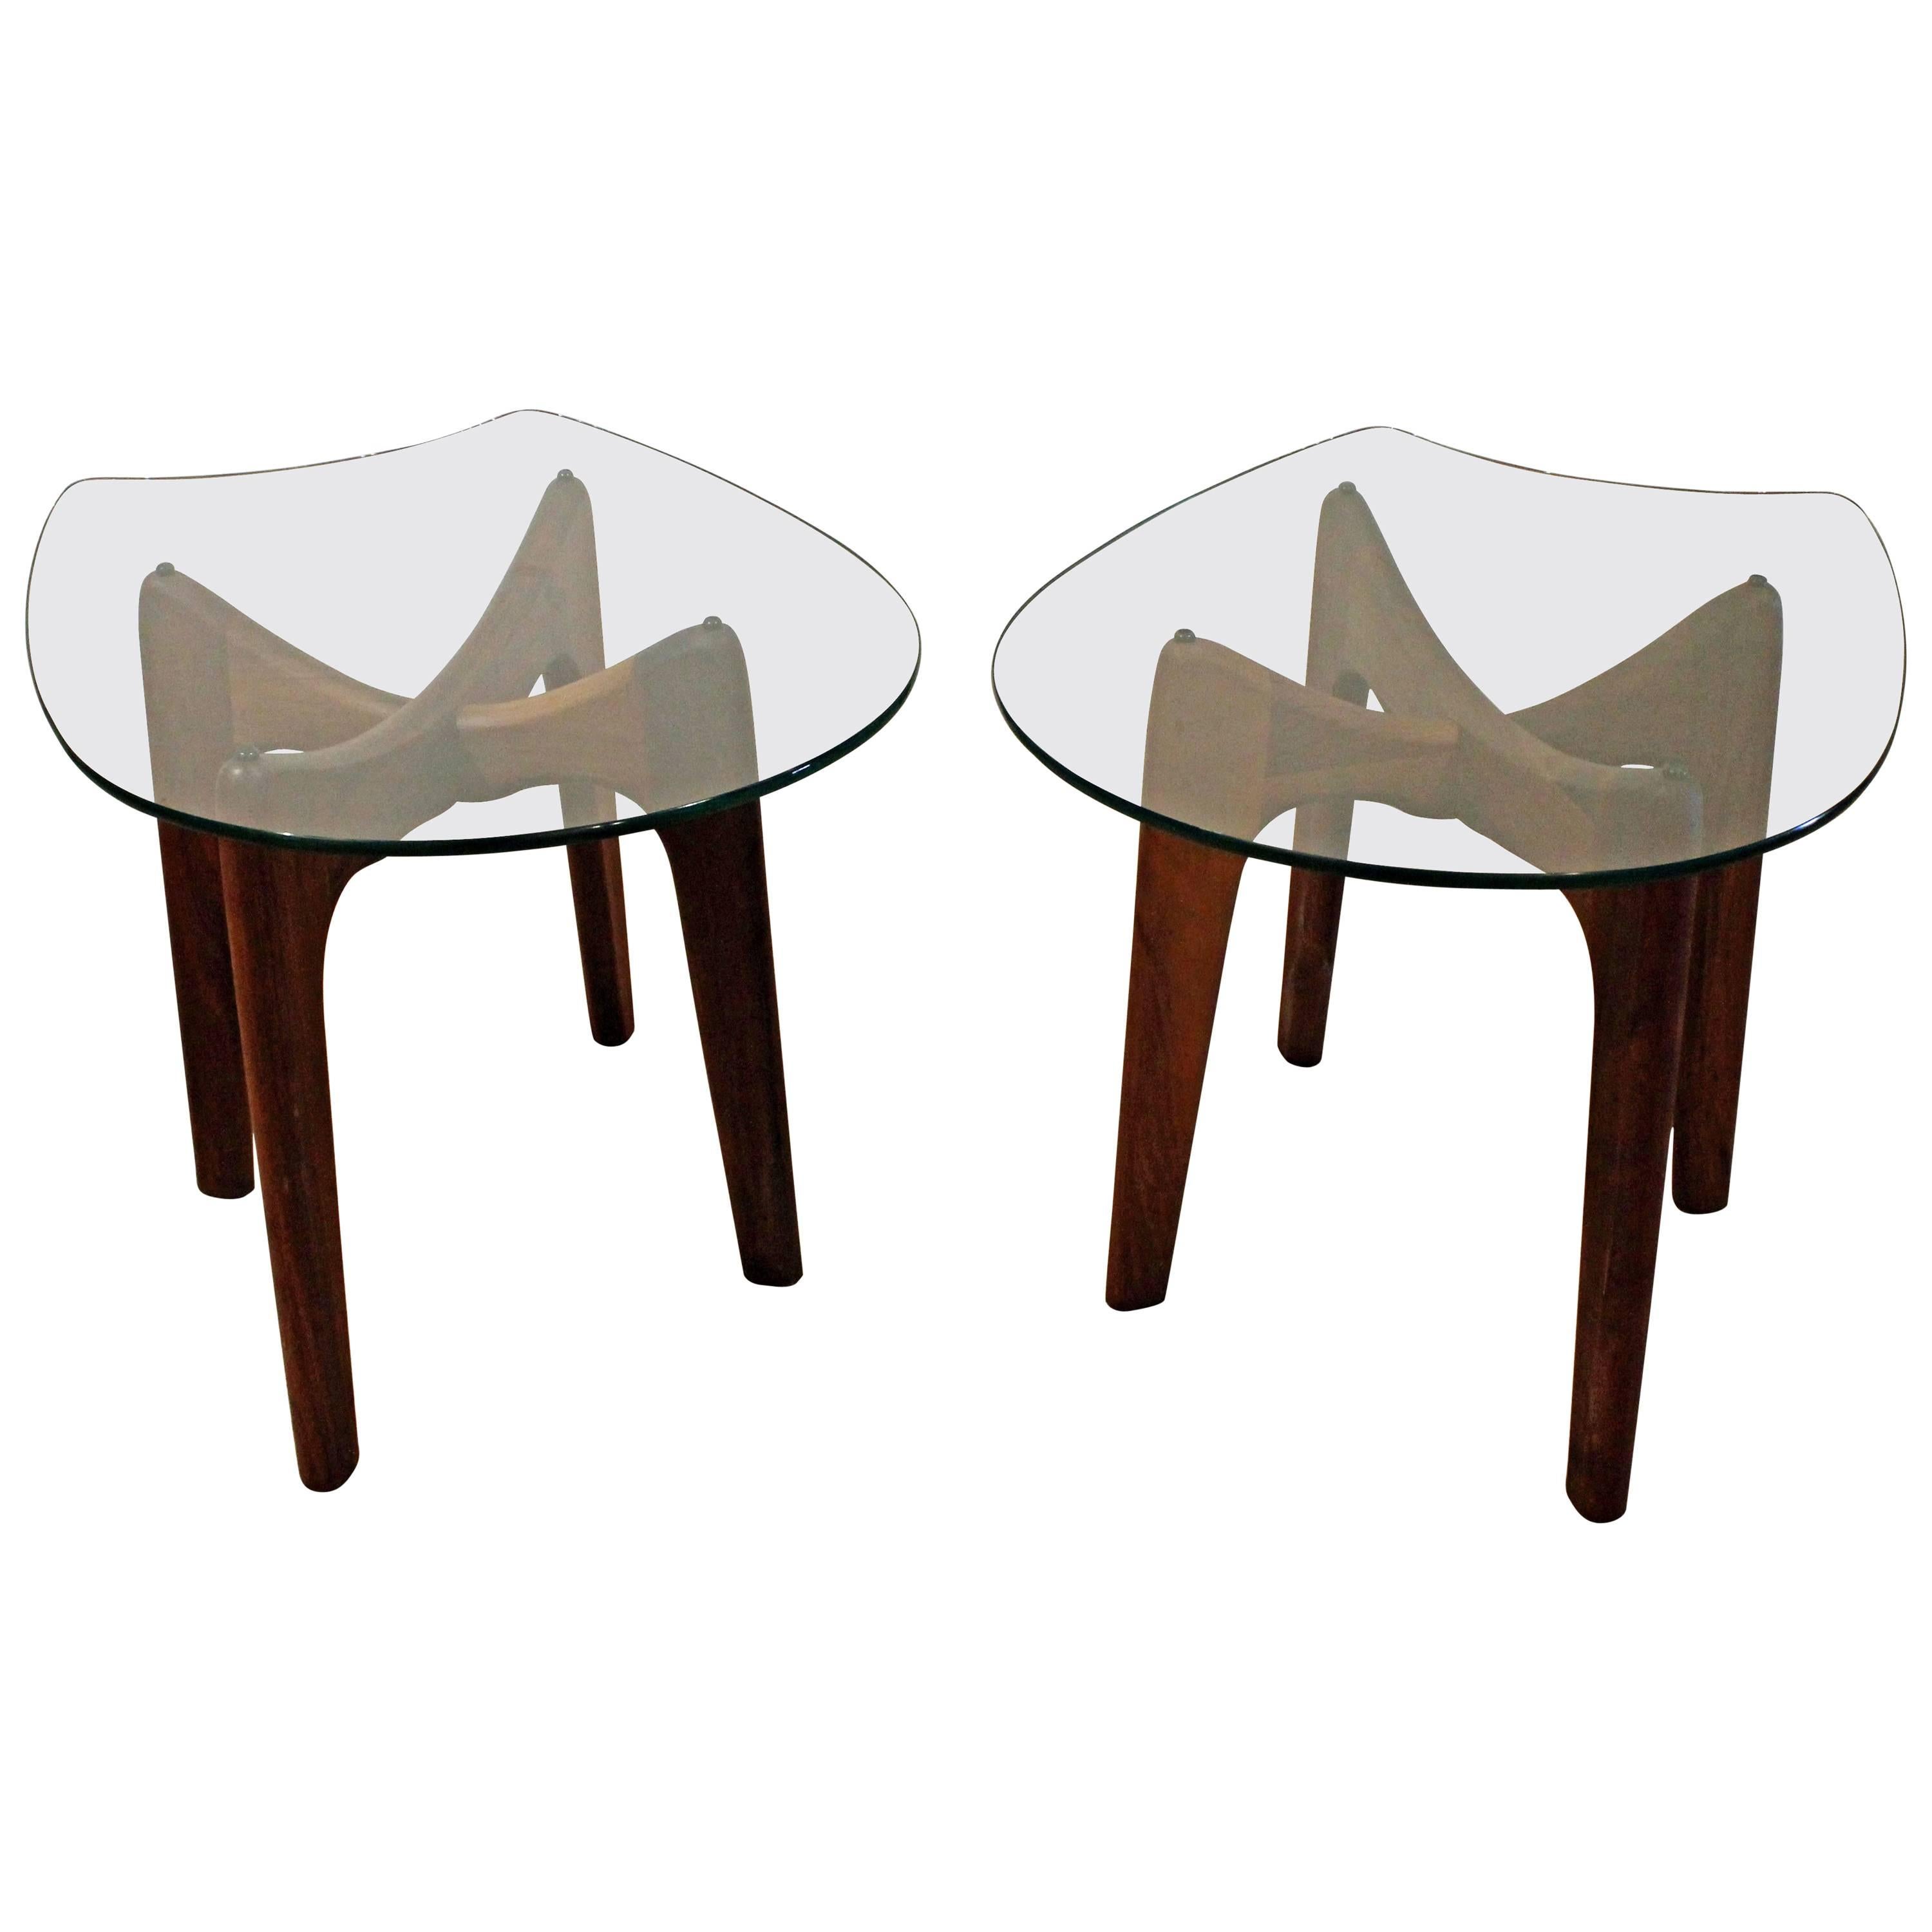 Pair of Mid-Century Modern Adrian Pearsall "Stingray" End Tables 2397TE